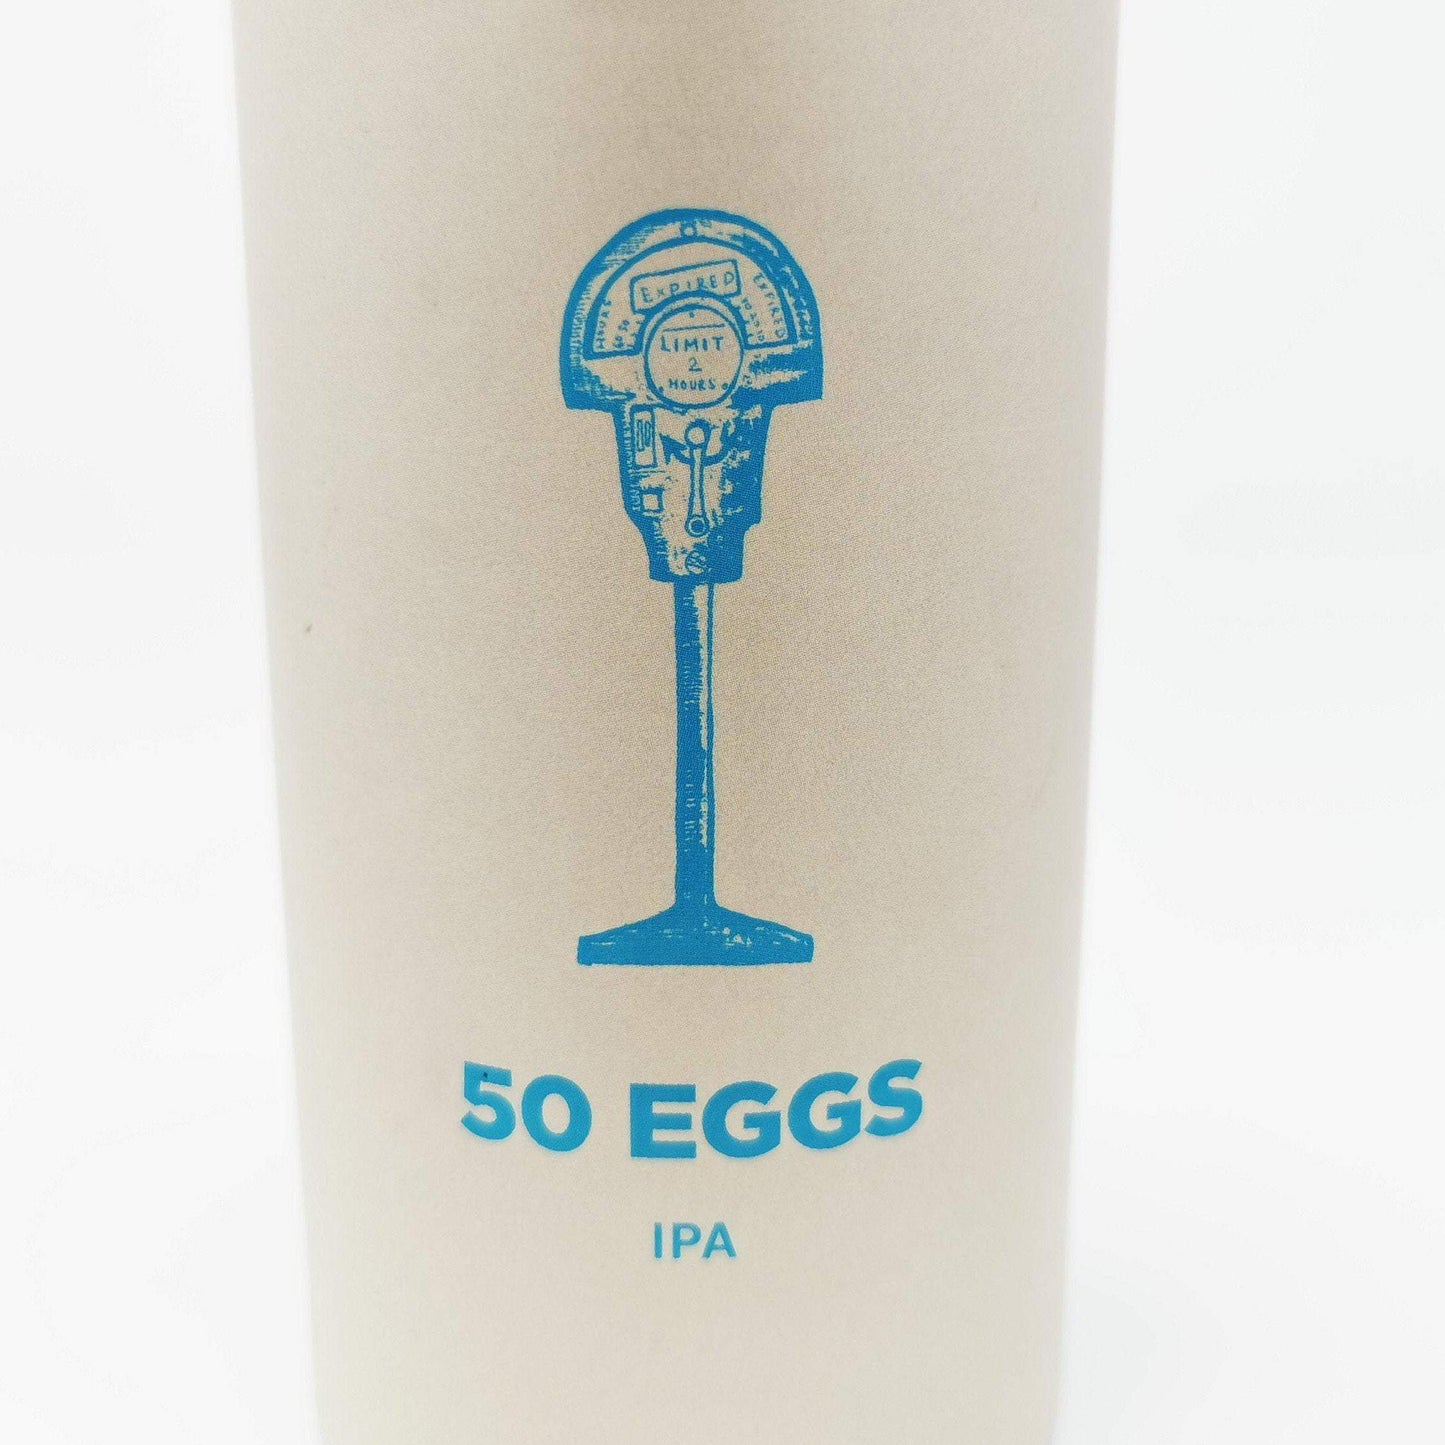 Pomona Island 50 Eggs Craft Beer Can Candle-Beer Can Candles-Adhock Homeware